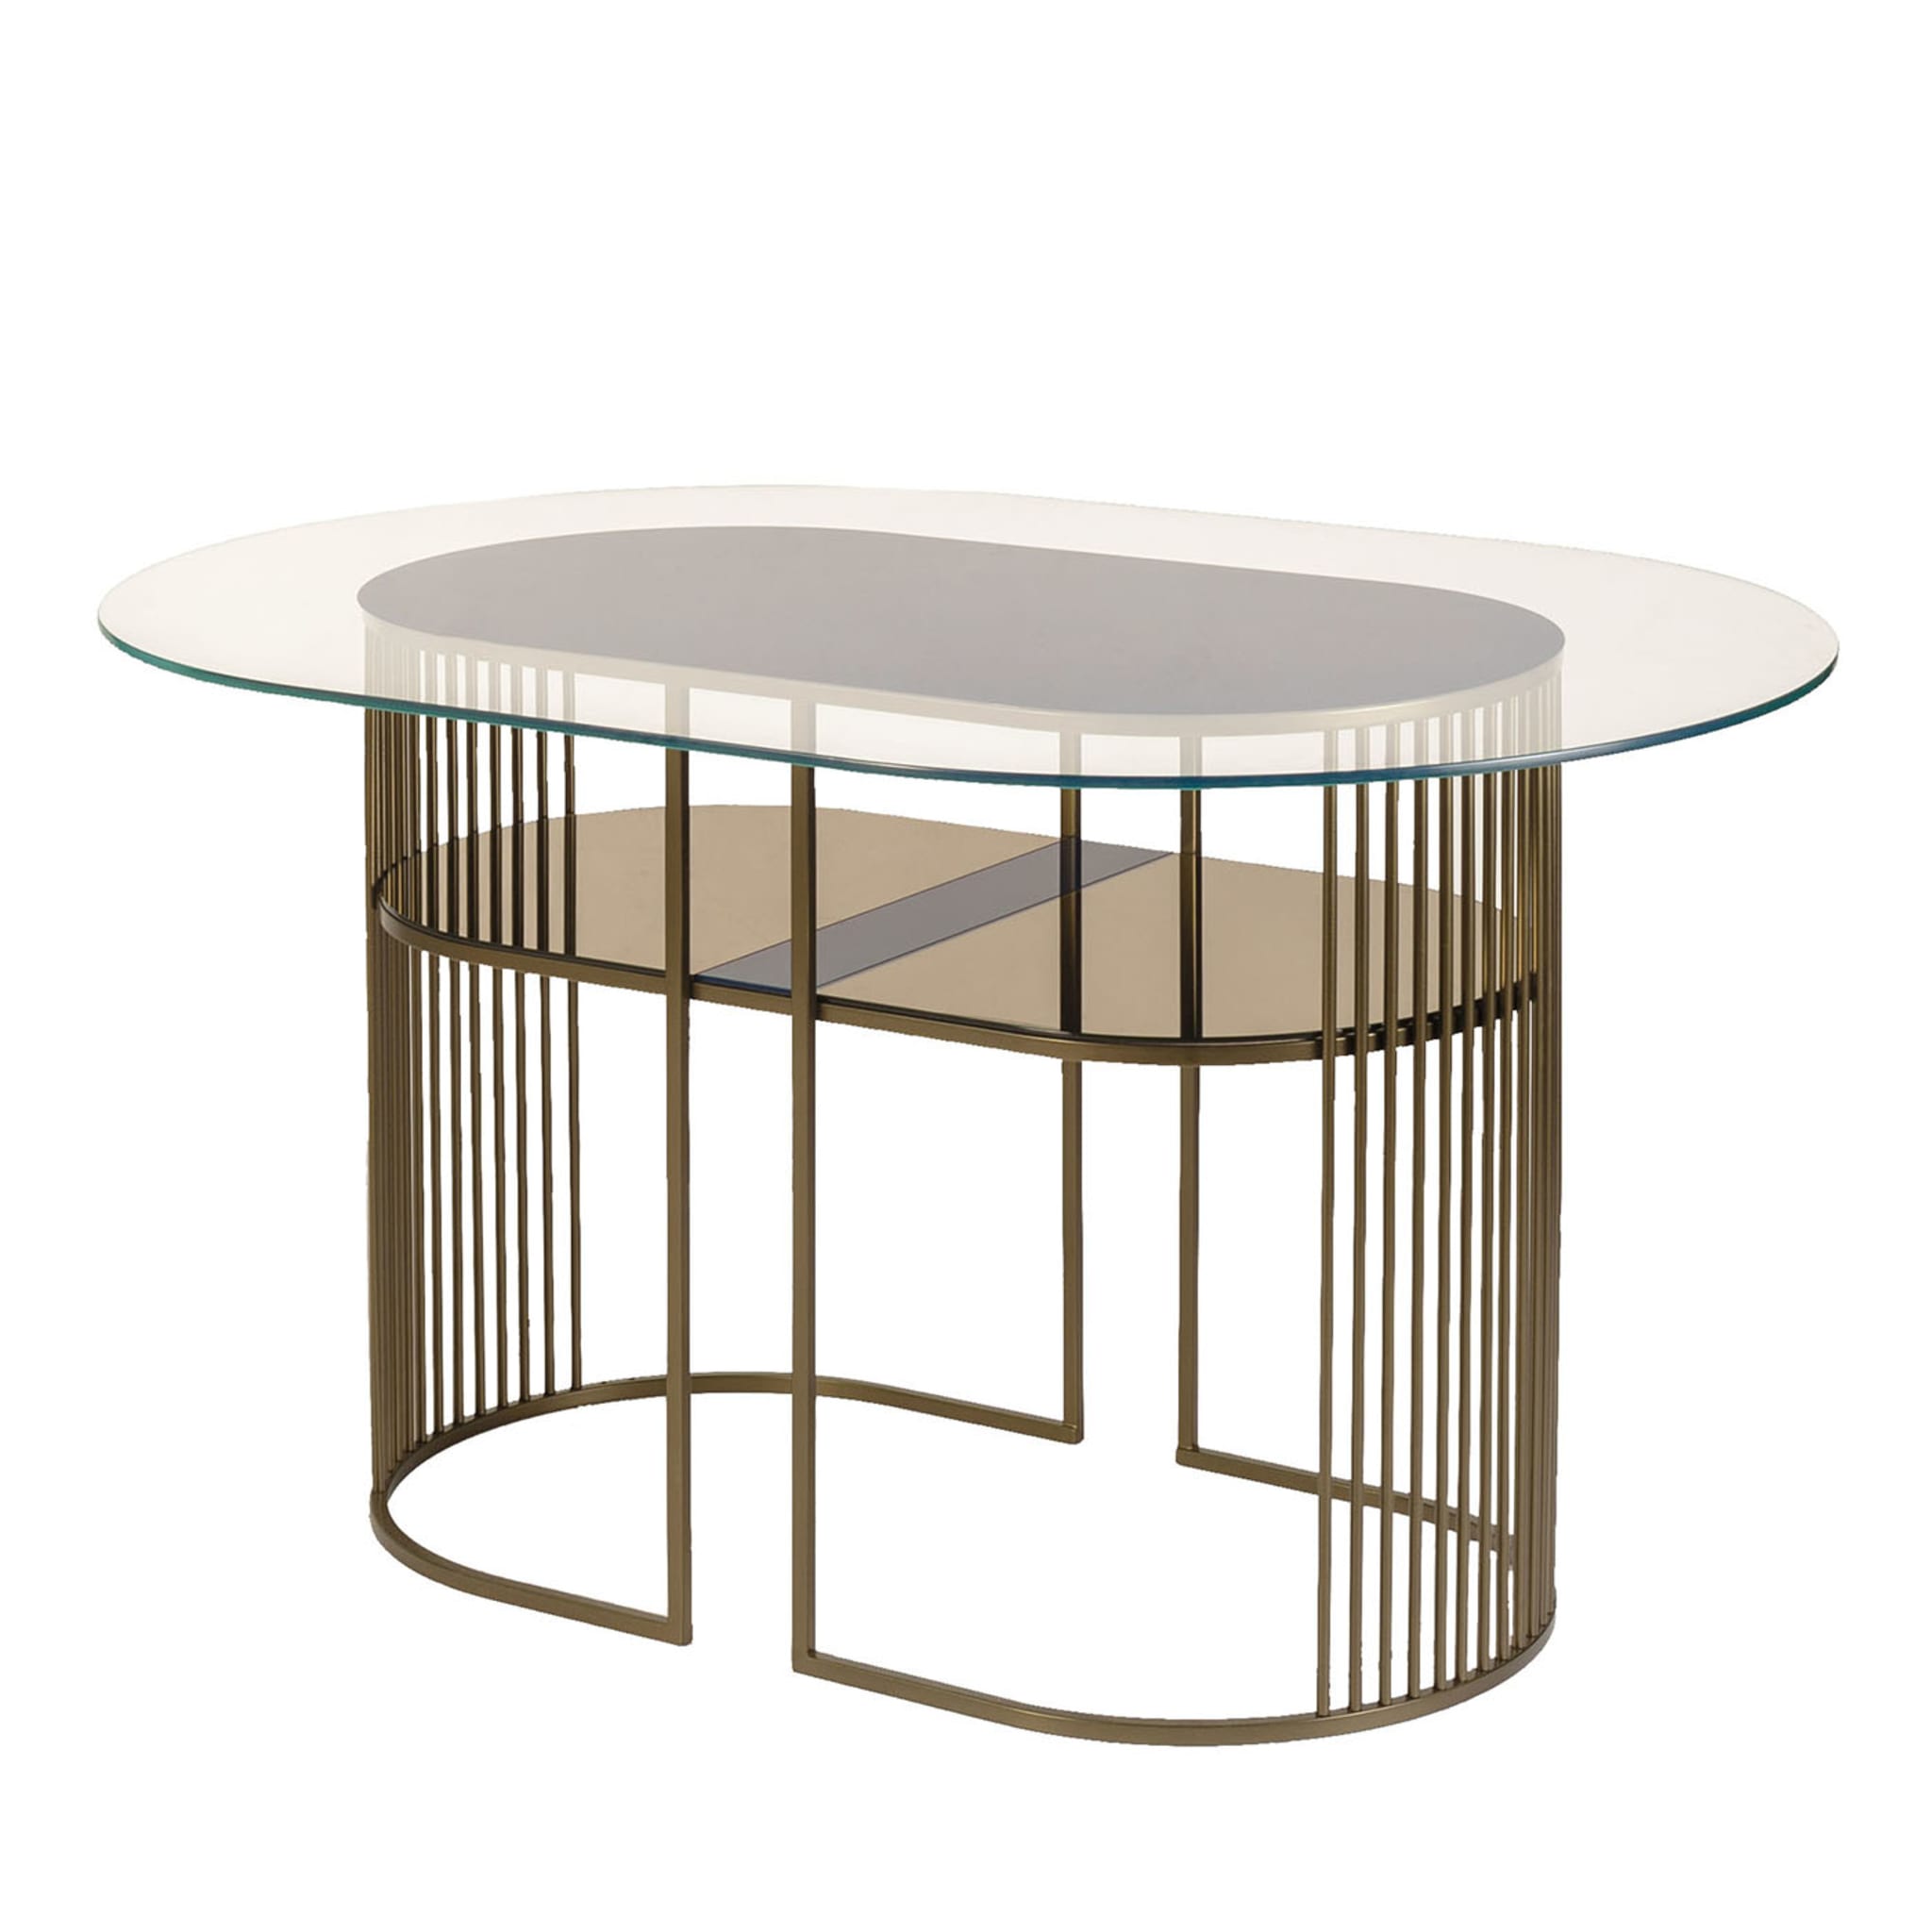 Aura Oval Table - Main view